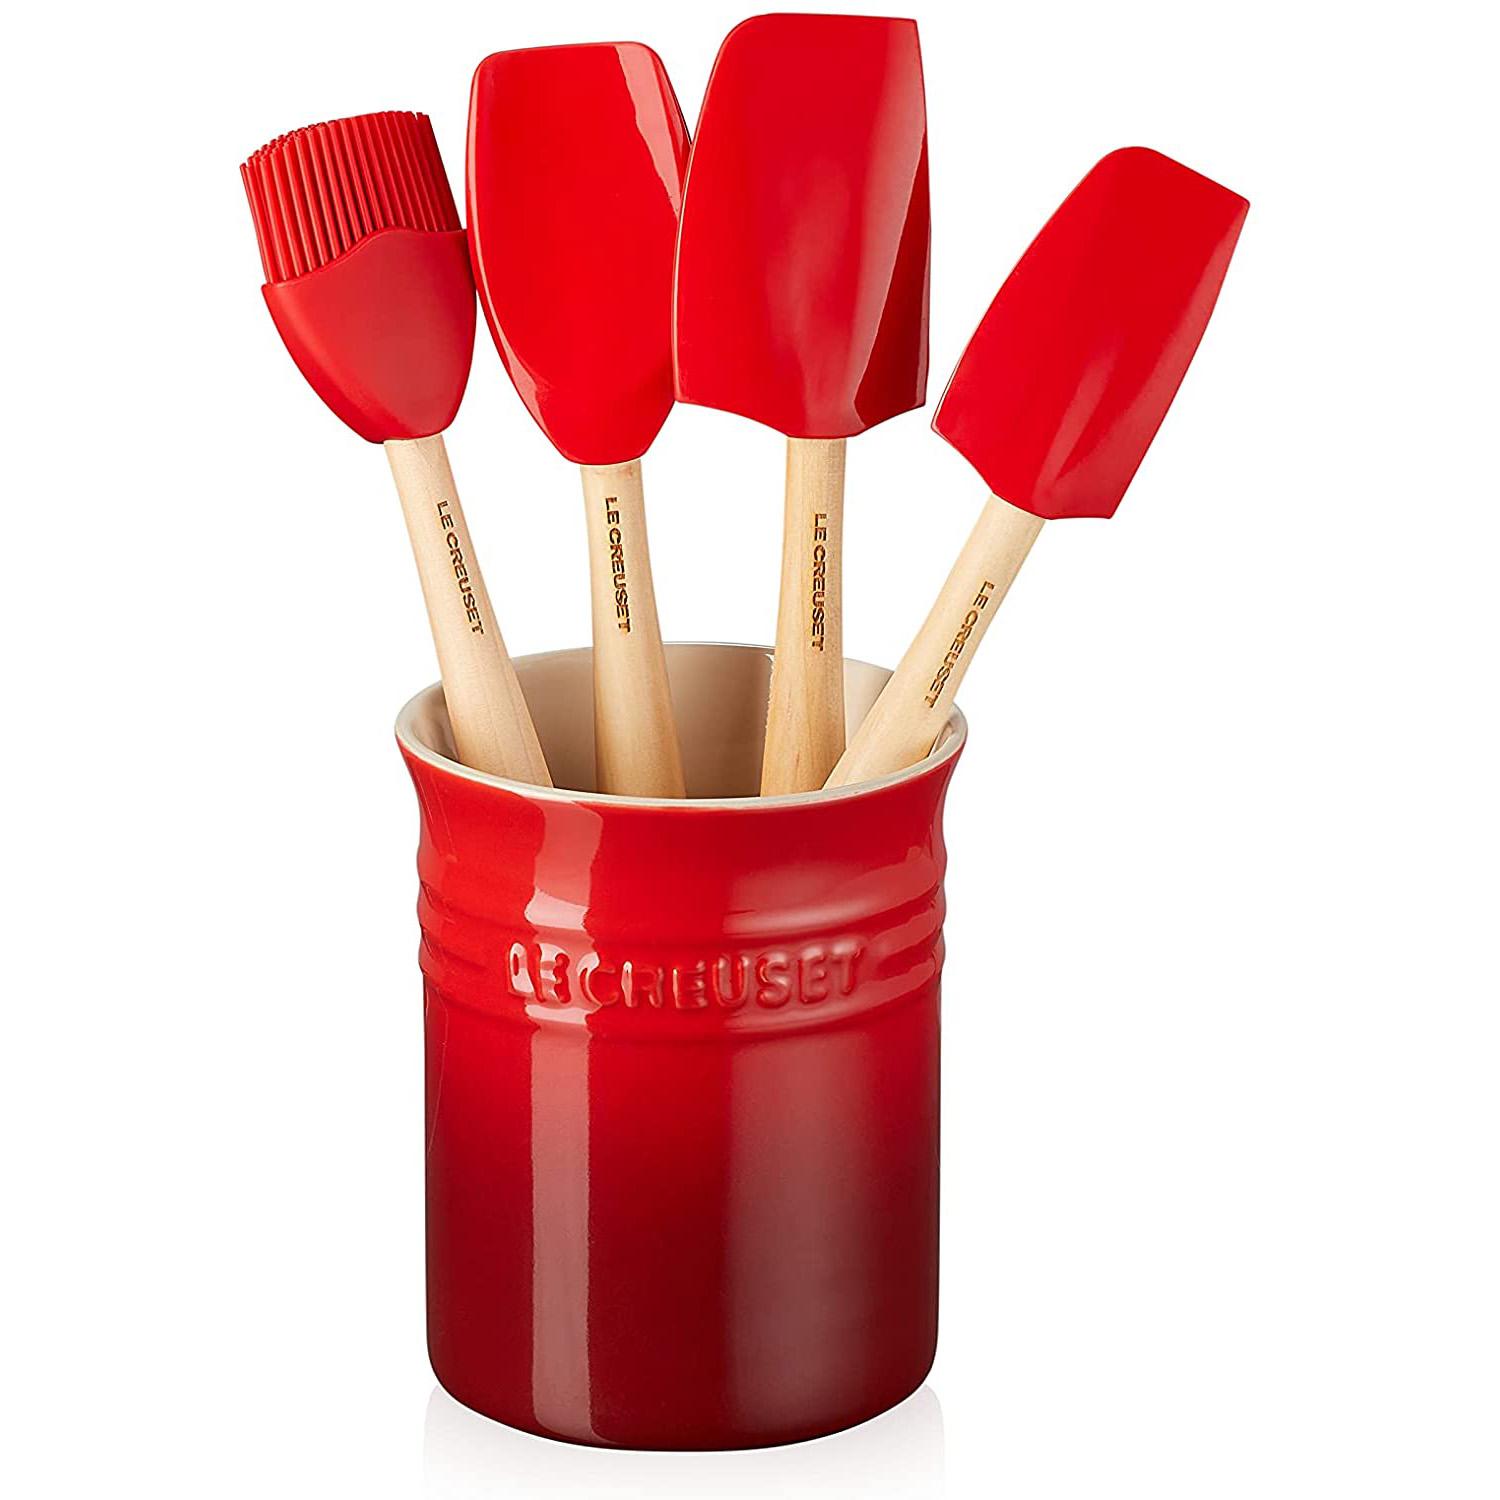 Le Creuset Silicone Craft Series Utensil Set for $37.99 Shipped